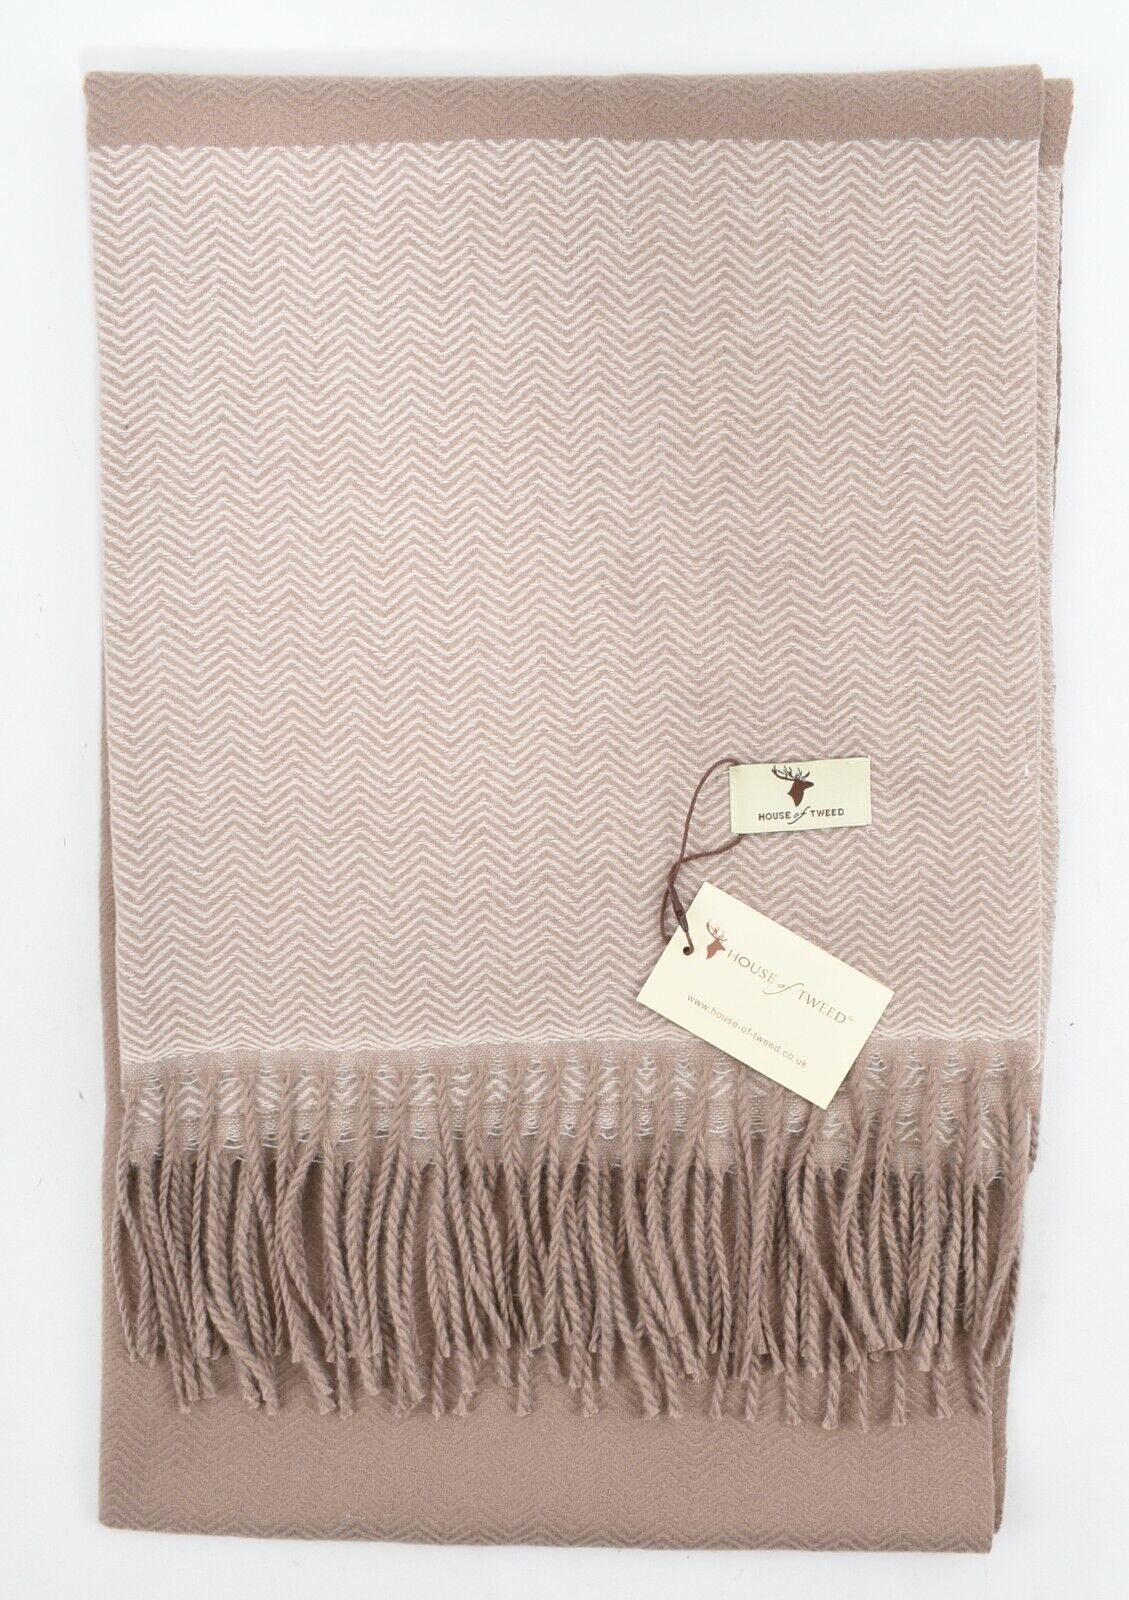 HOUSE OF TWEED Womens Fringed Scarf, Taupe